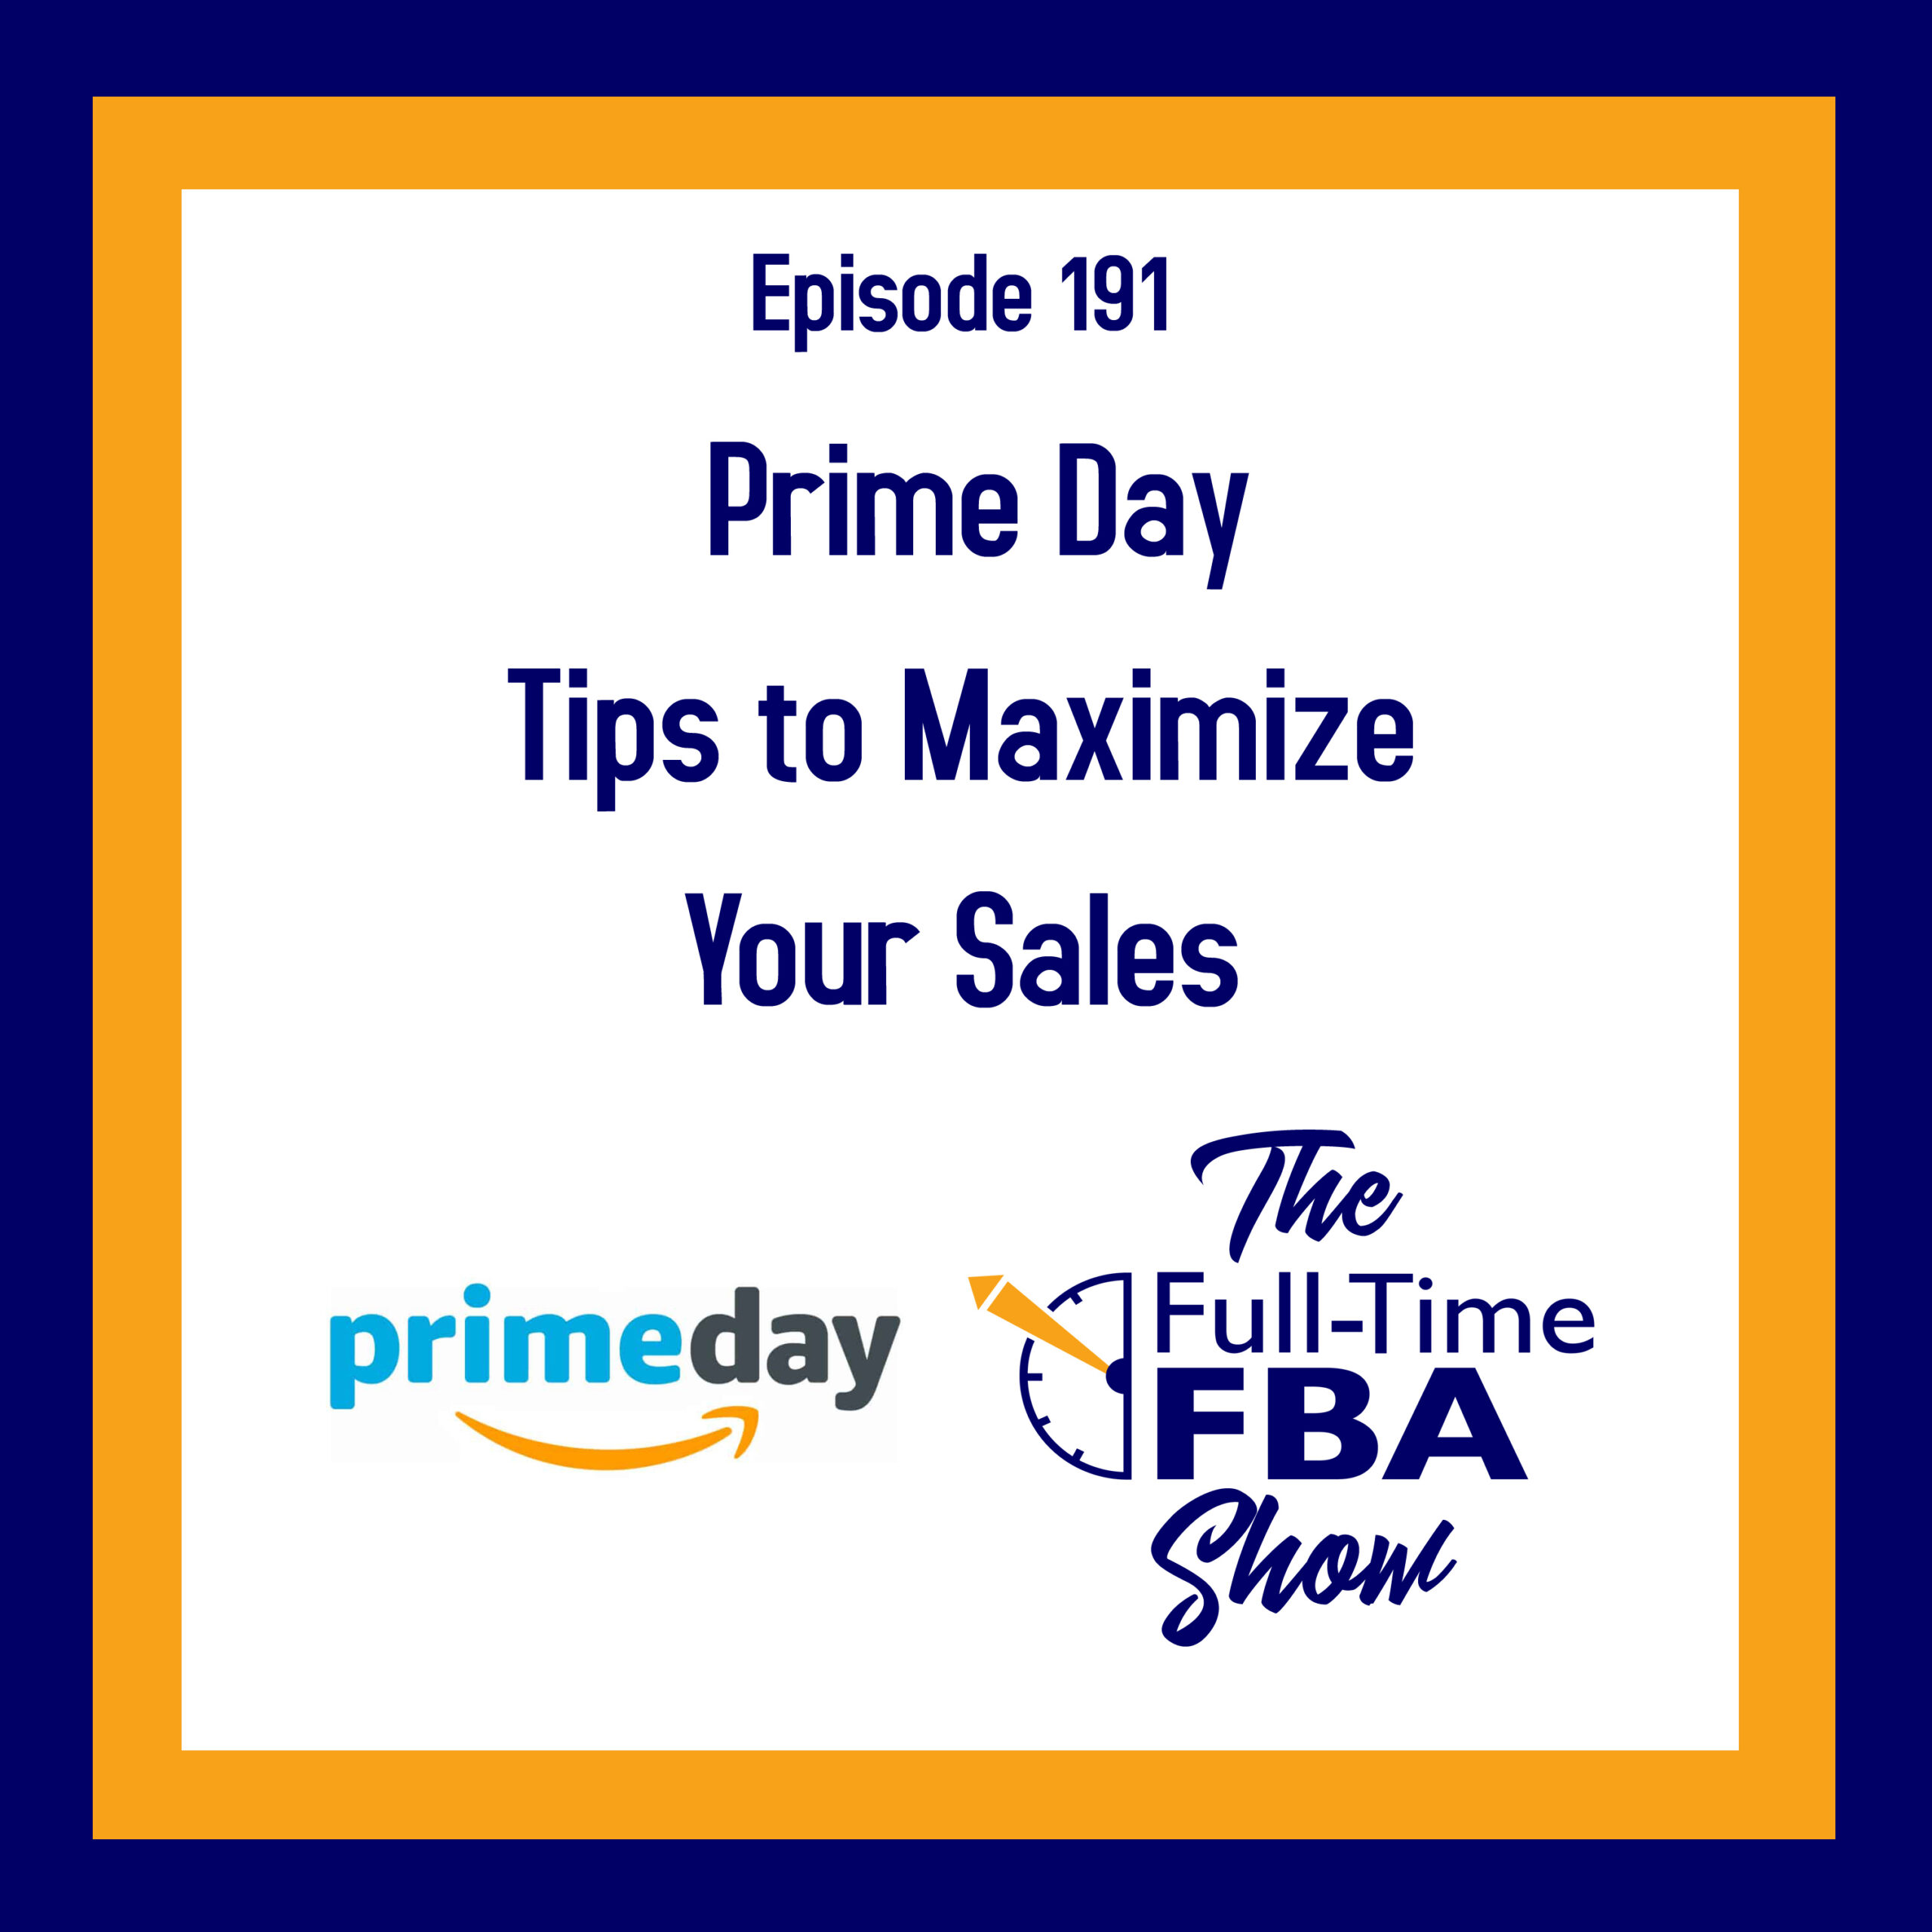 Podcast Episode 191 – Prime Day Tricks to Maximize Your Gross sales